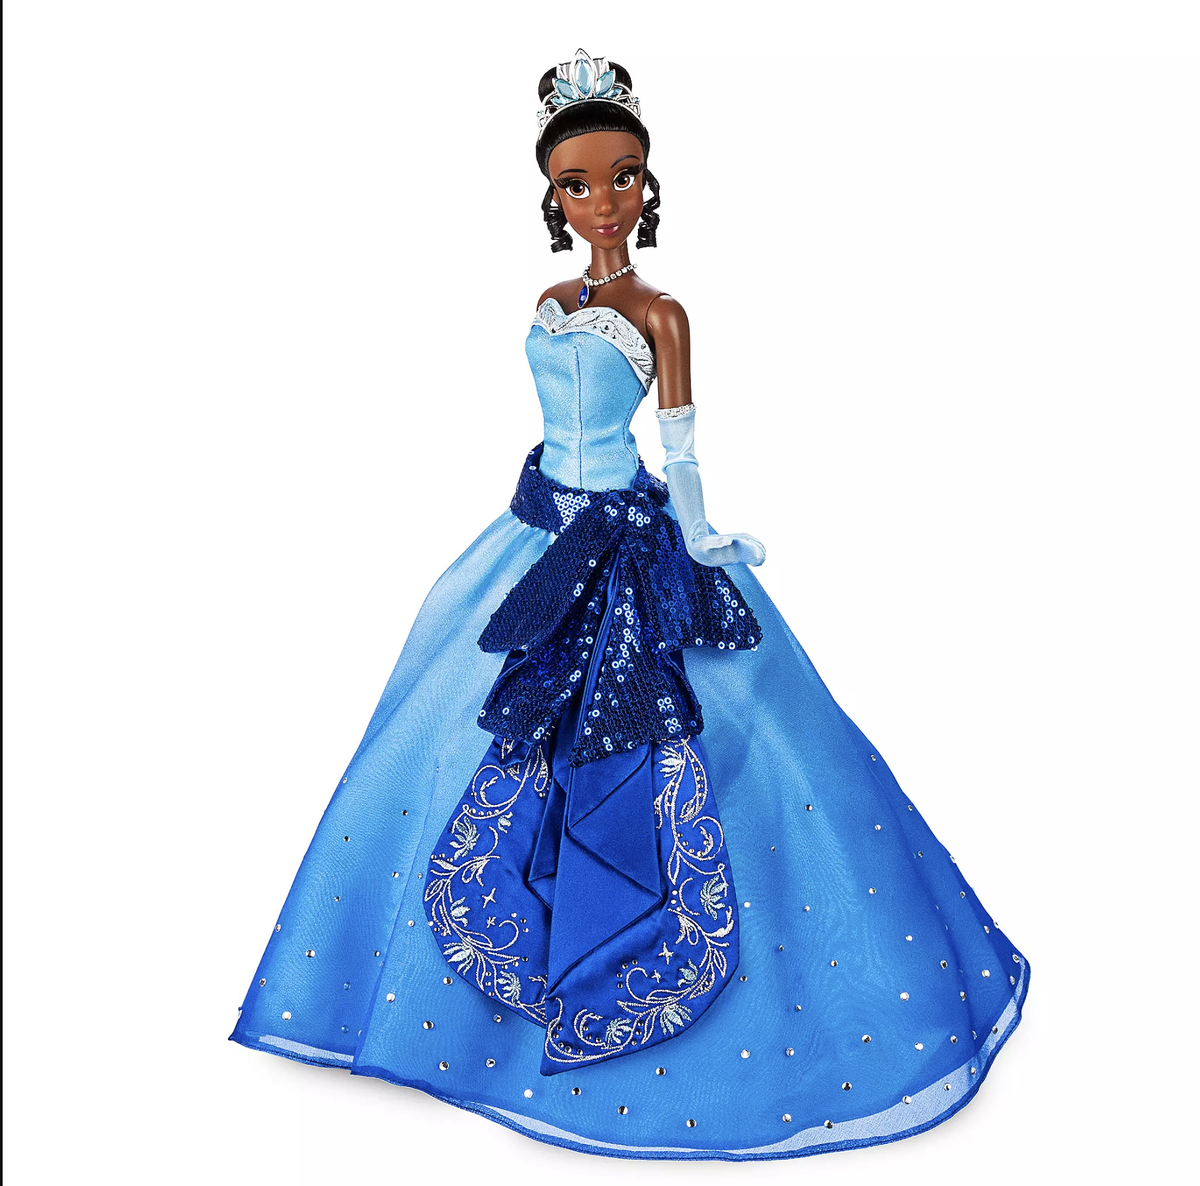 https://static.wikia.nocookie.net/disneydolls/images/0/06/2019_Tiana_Limited_Edition_10th_Anniversary.png/revision/latest/scale-to-width-down/1200?cb=20200127215213